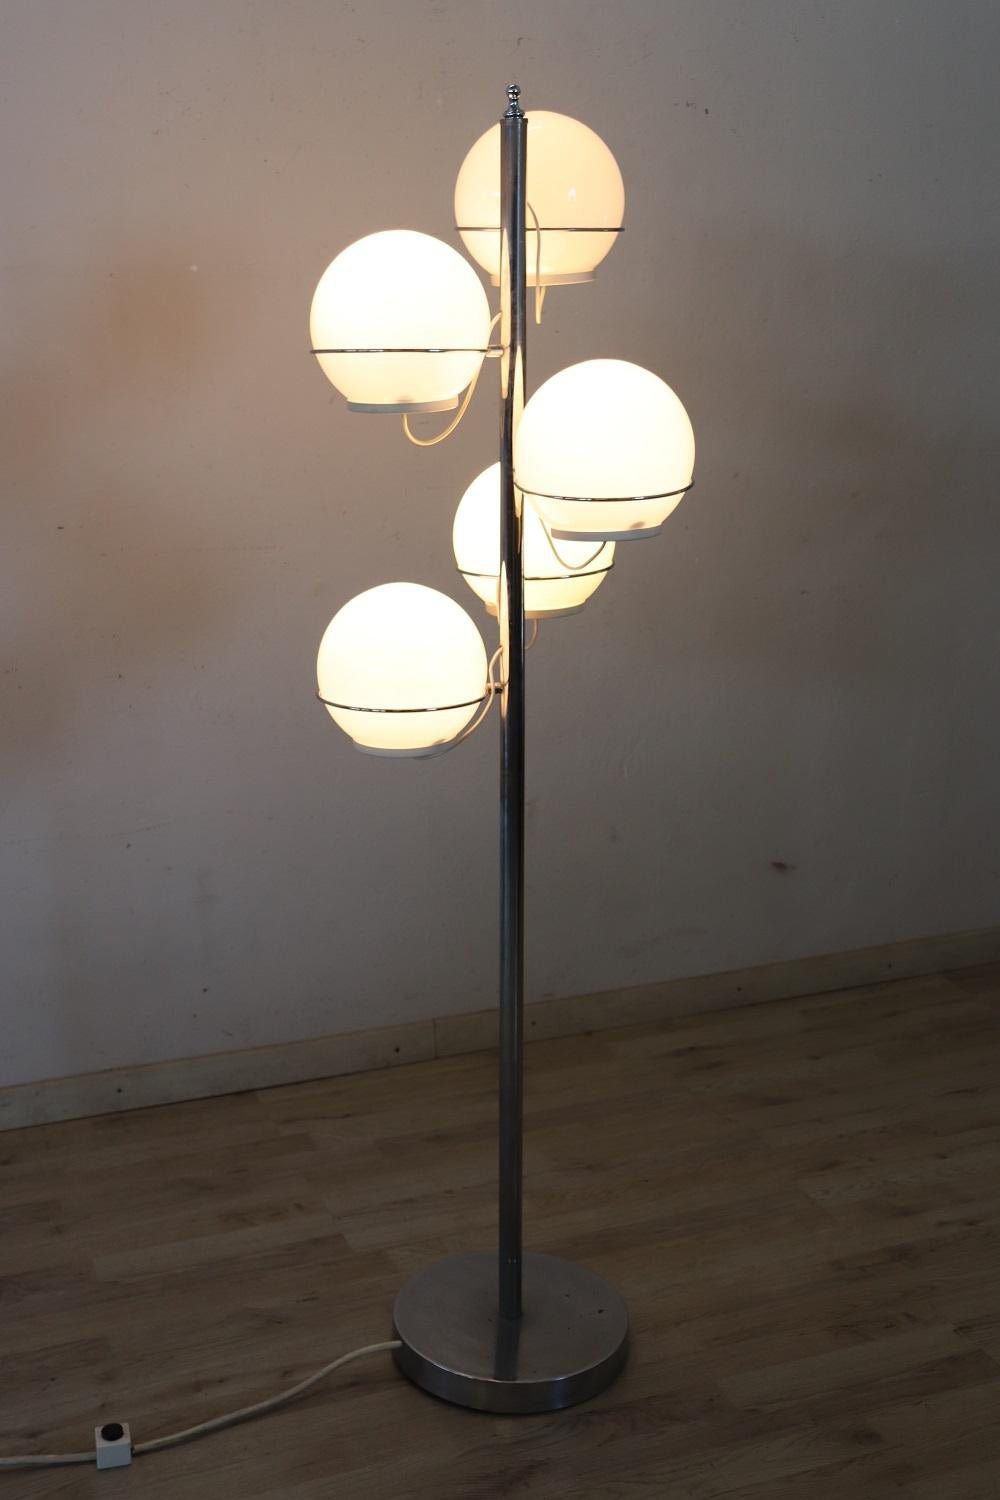 Beautiful 1960s Italian design by Gino Sarfatti. The floor lamp is in chromed metal and the bowls are in white glass. It is also possible to light the bowls separately. Some signs of wear in the chrome on the base. No branding present. Very elegant,